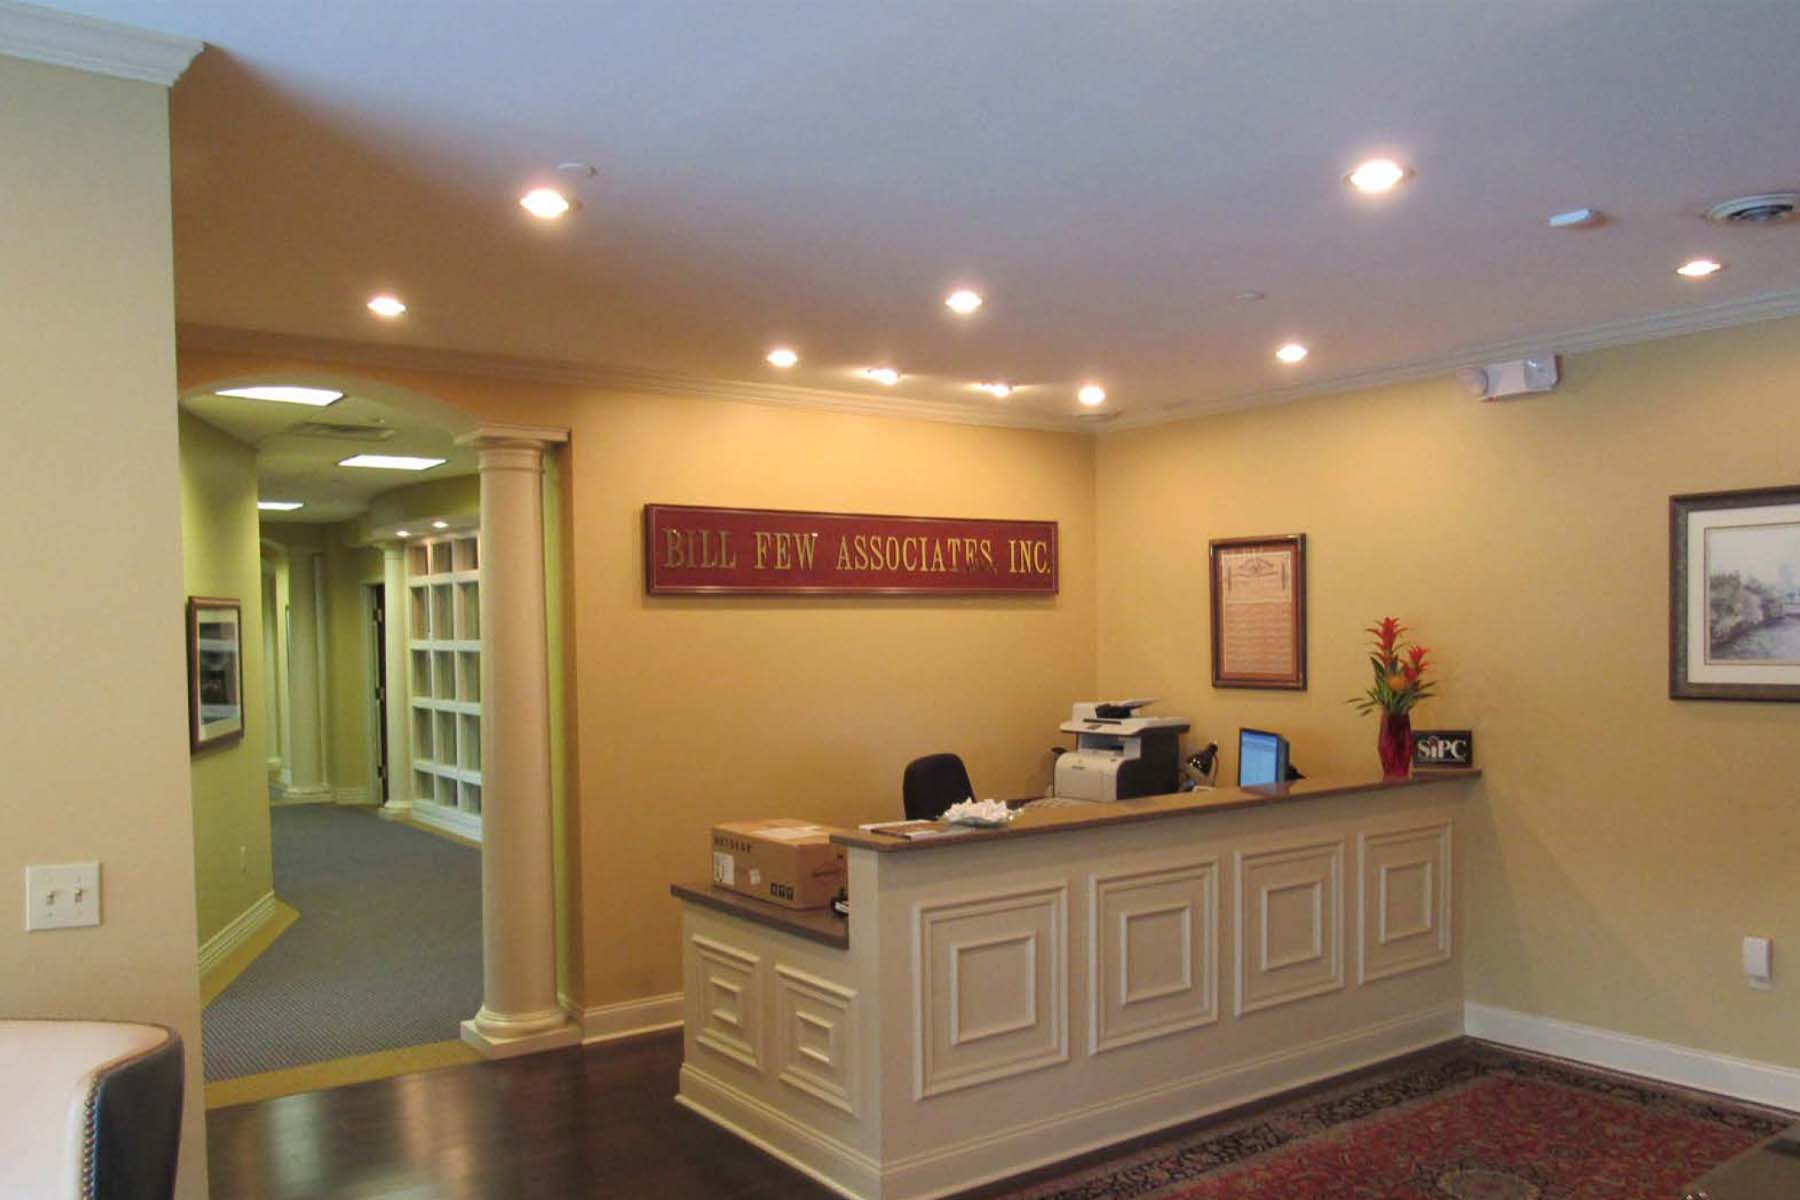 Lobby welcome desk and sign